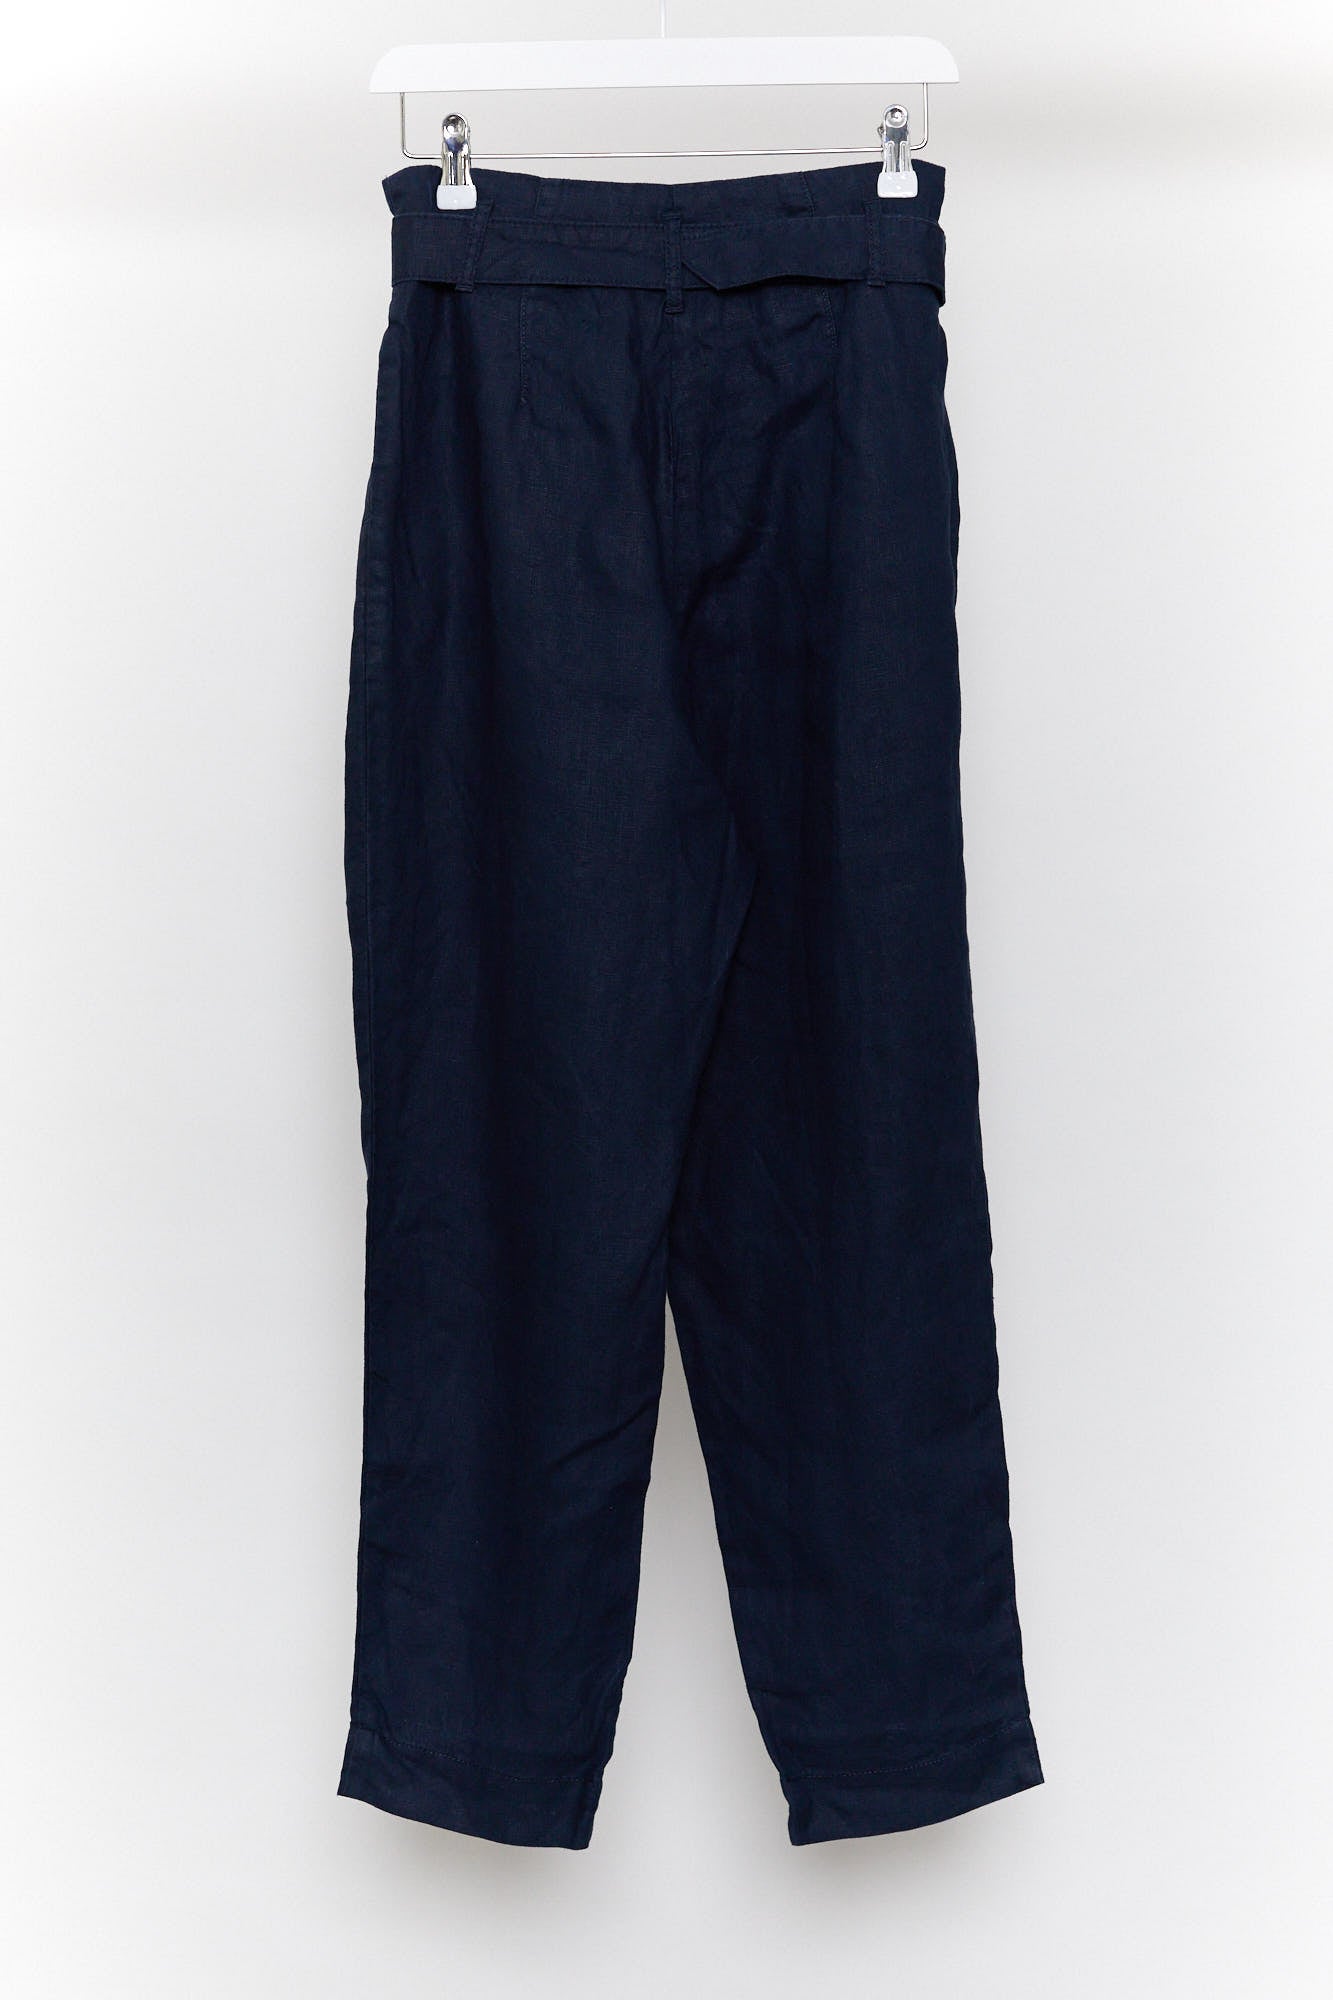 Womens Navy linen M&S Trousers size 10